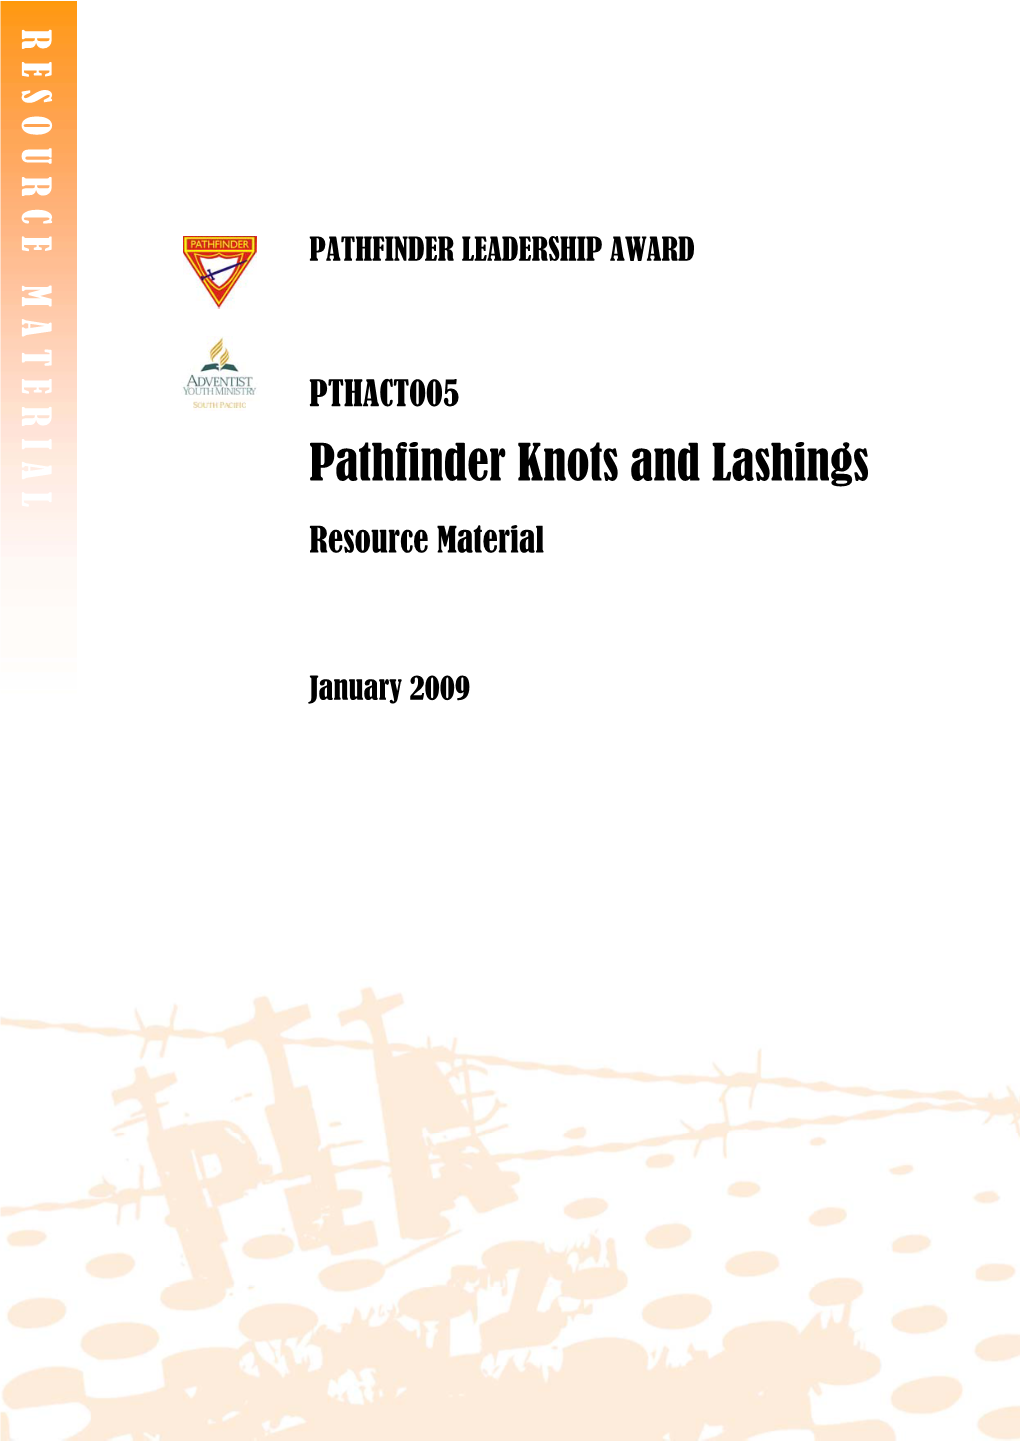 Pathfinder Knots and Lashings | Resource Material